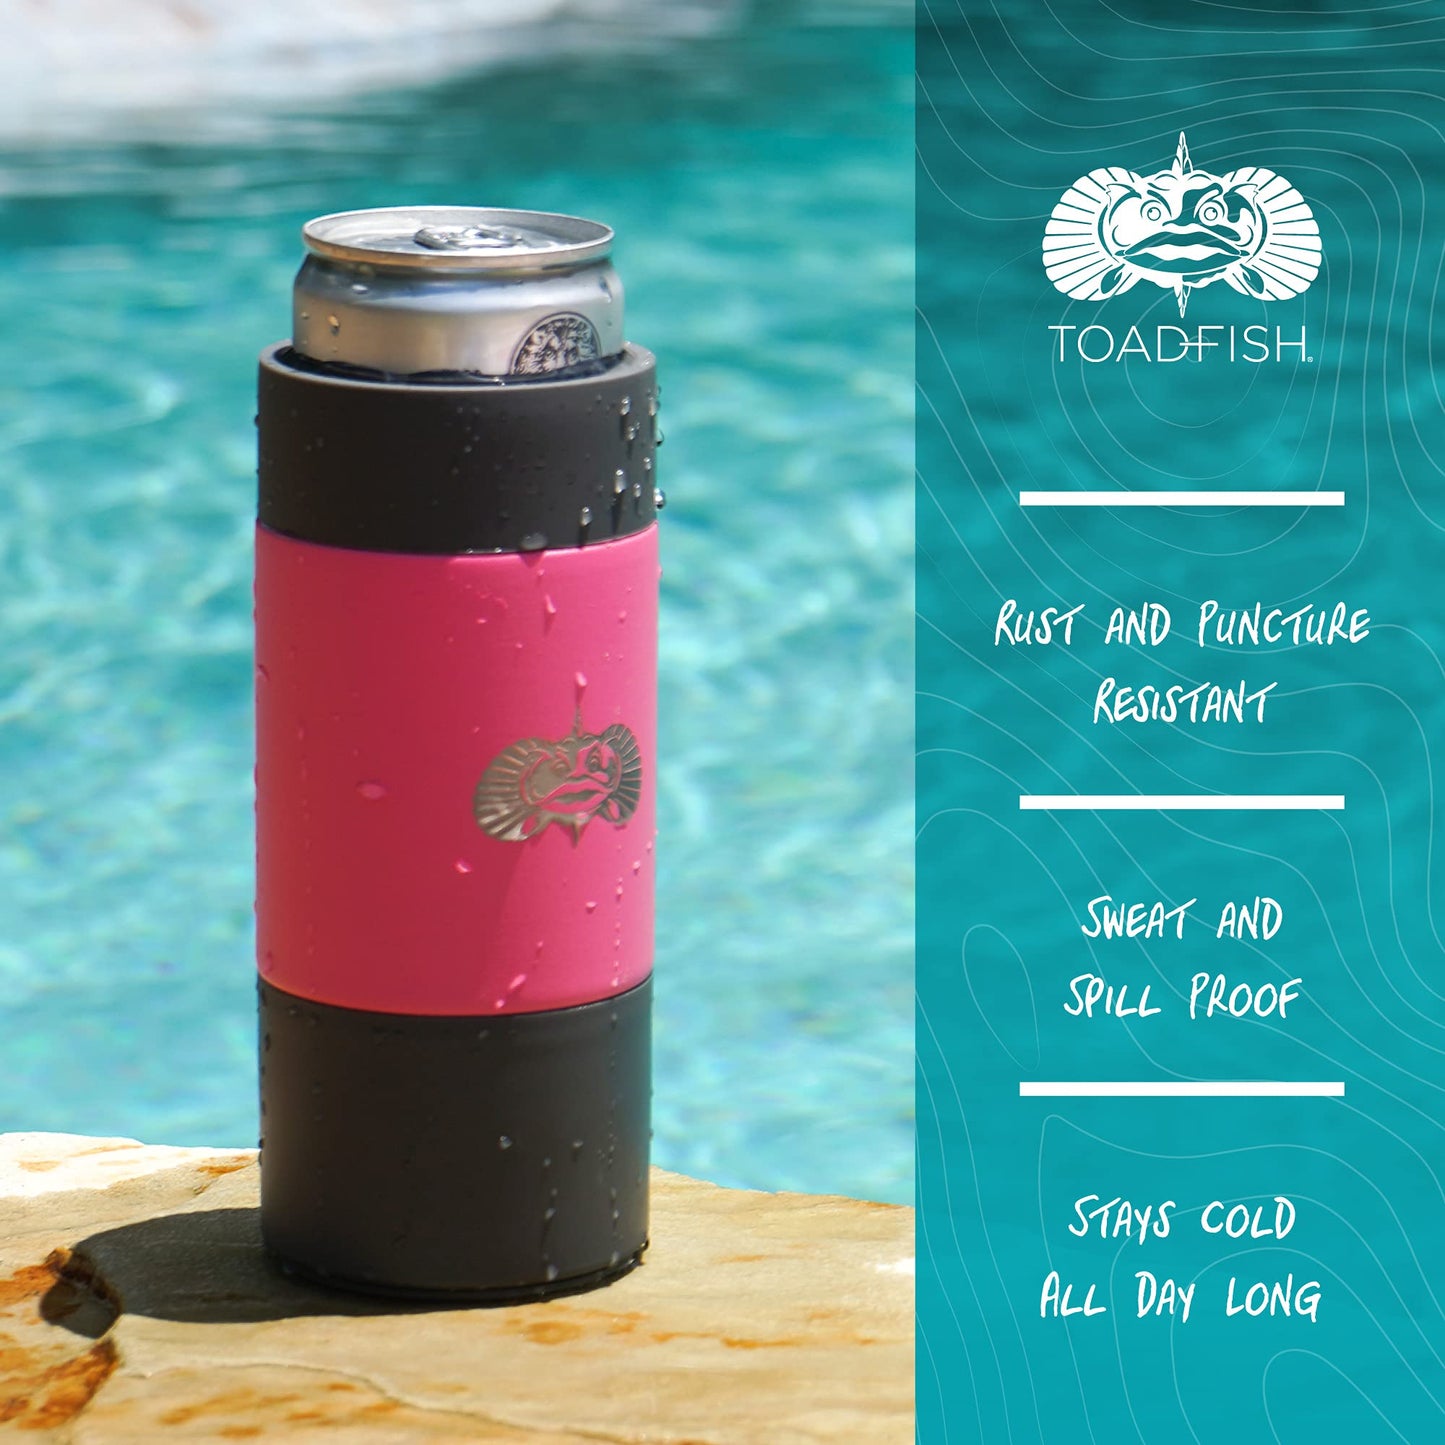 Toadfish Slim Non-Tipping Can Cooler